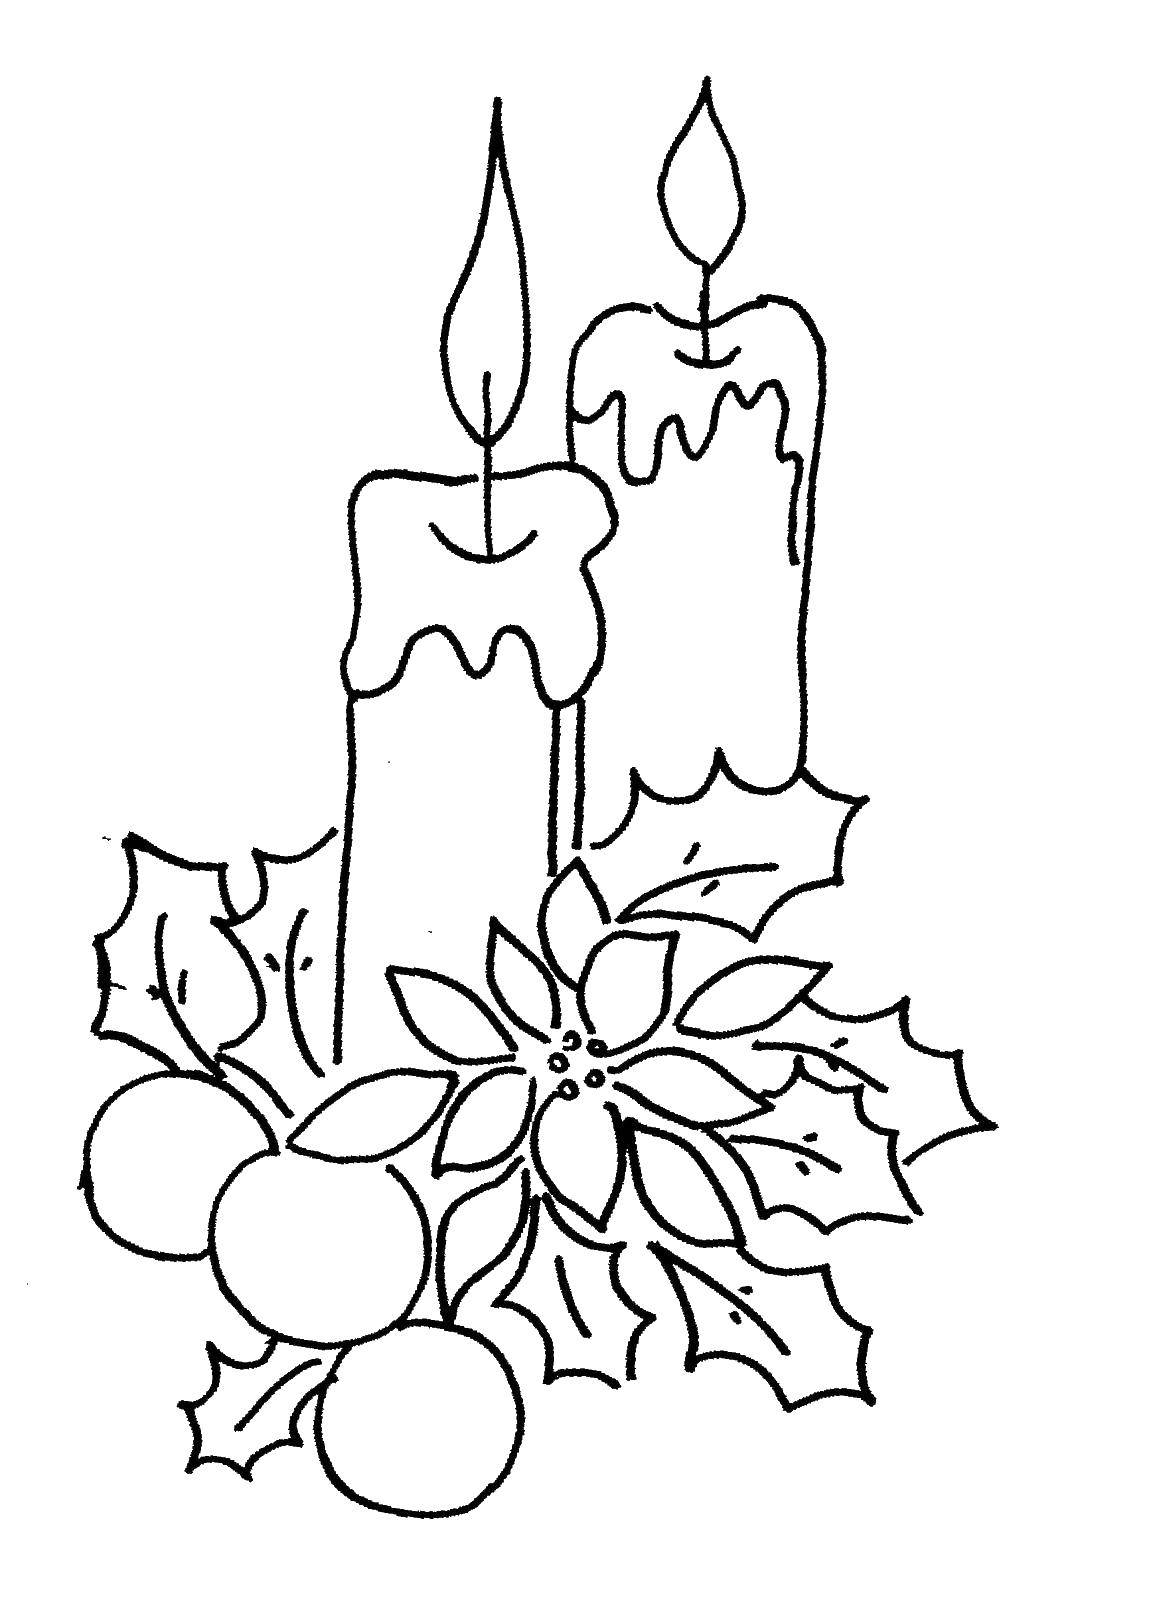 Coloring Two candles. Category Christmas. Tags:  candle, mistletoe.